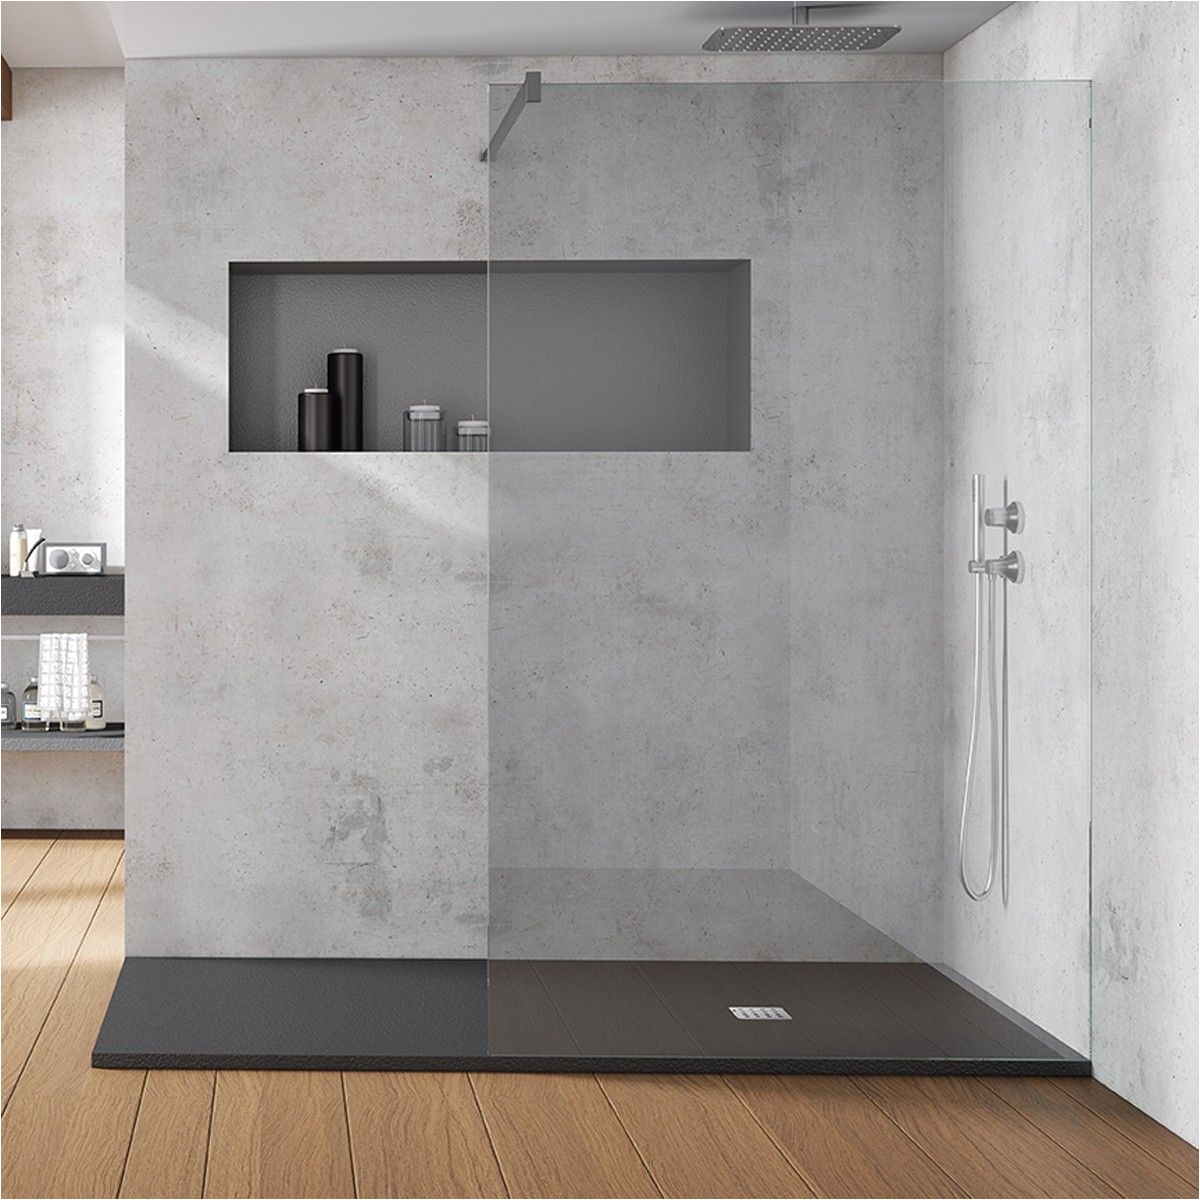 Europe s Leading Slate & Stone Shower Tray Manufacturer Pricing Includes Waste & Trap Bespoke manufactured in Spain 5 Year Guarantee Pioneering